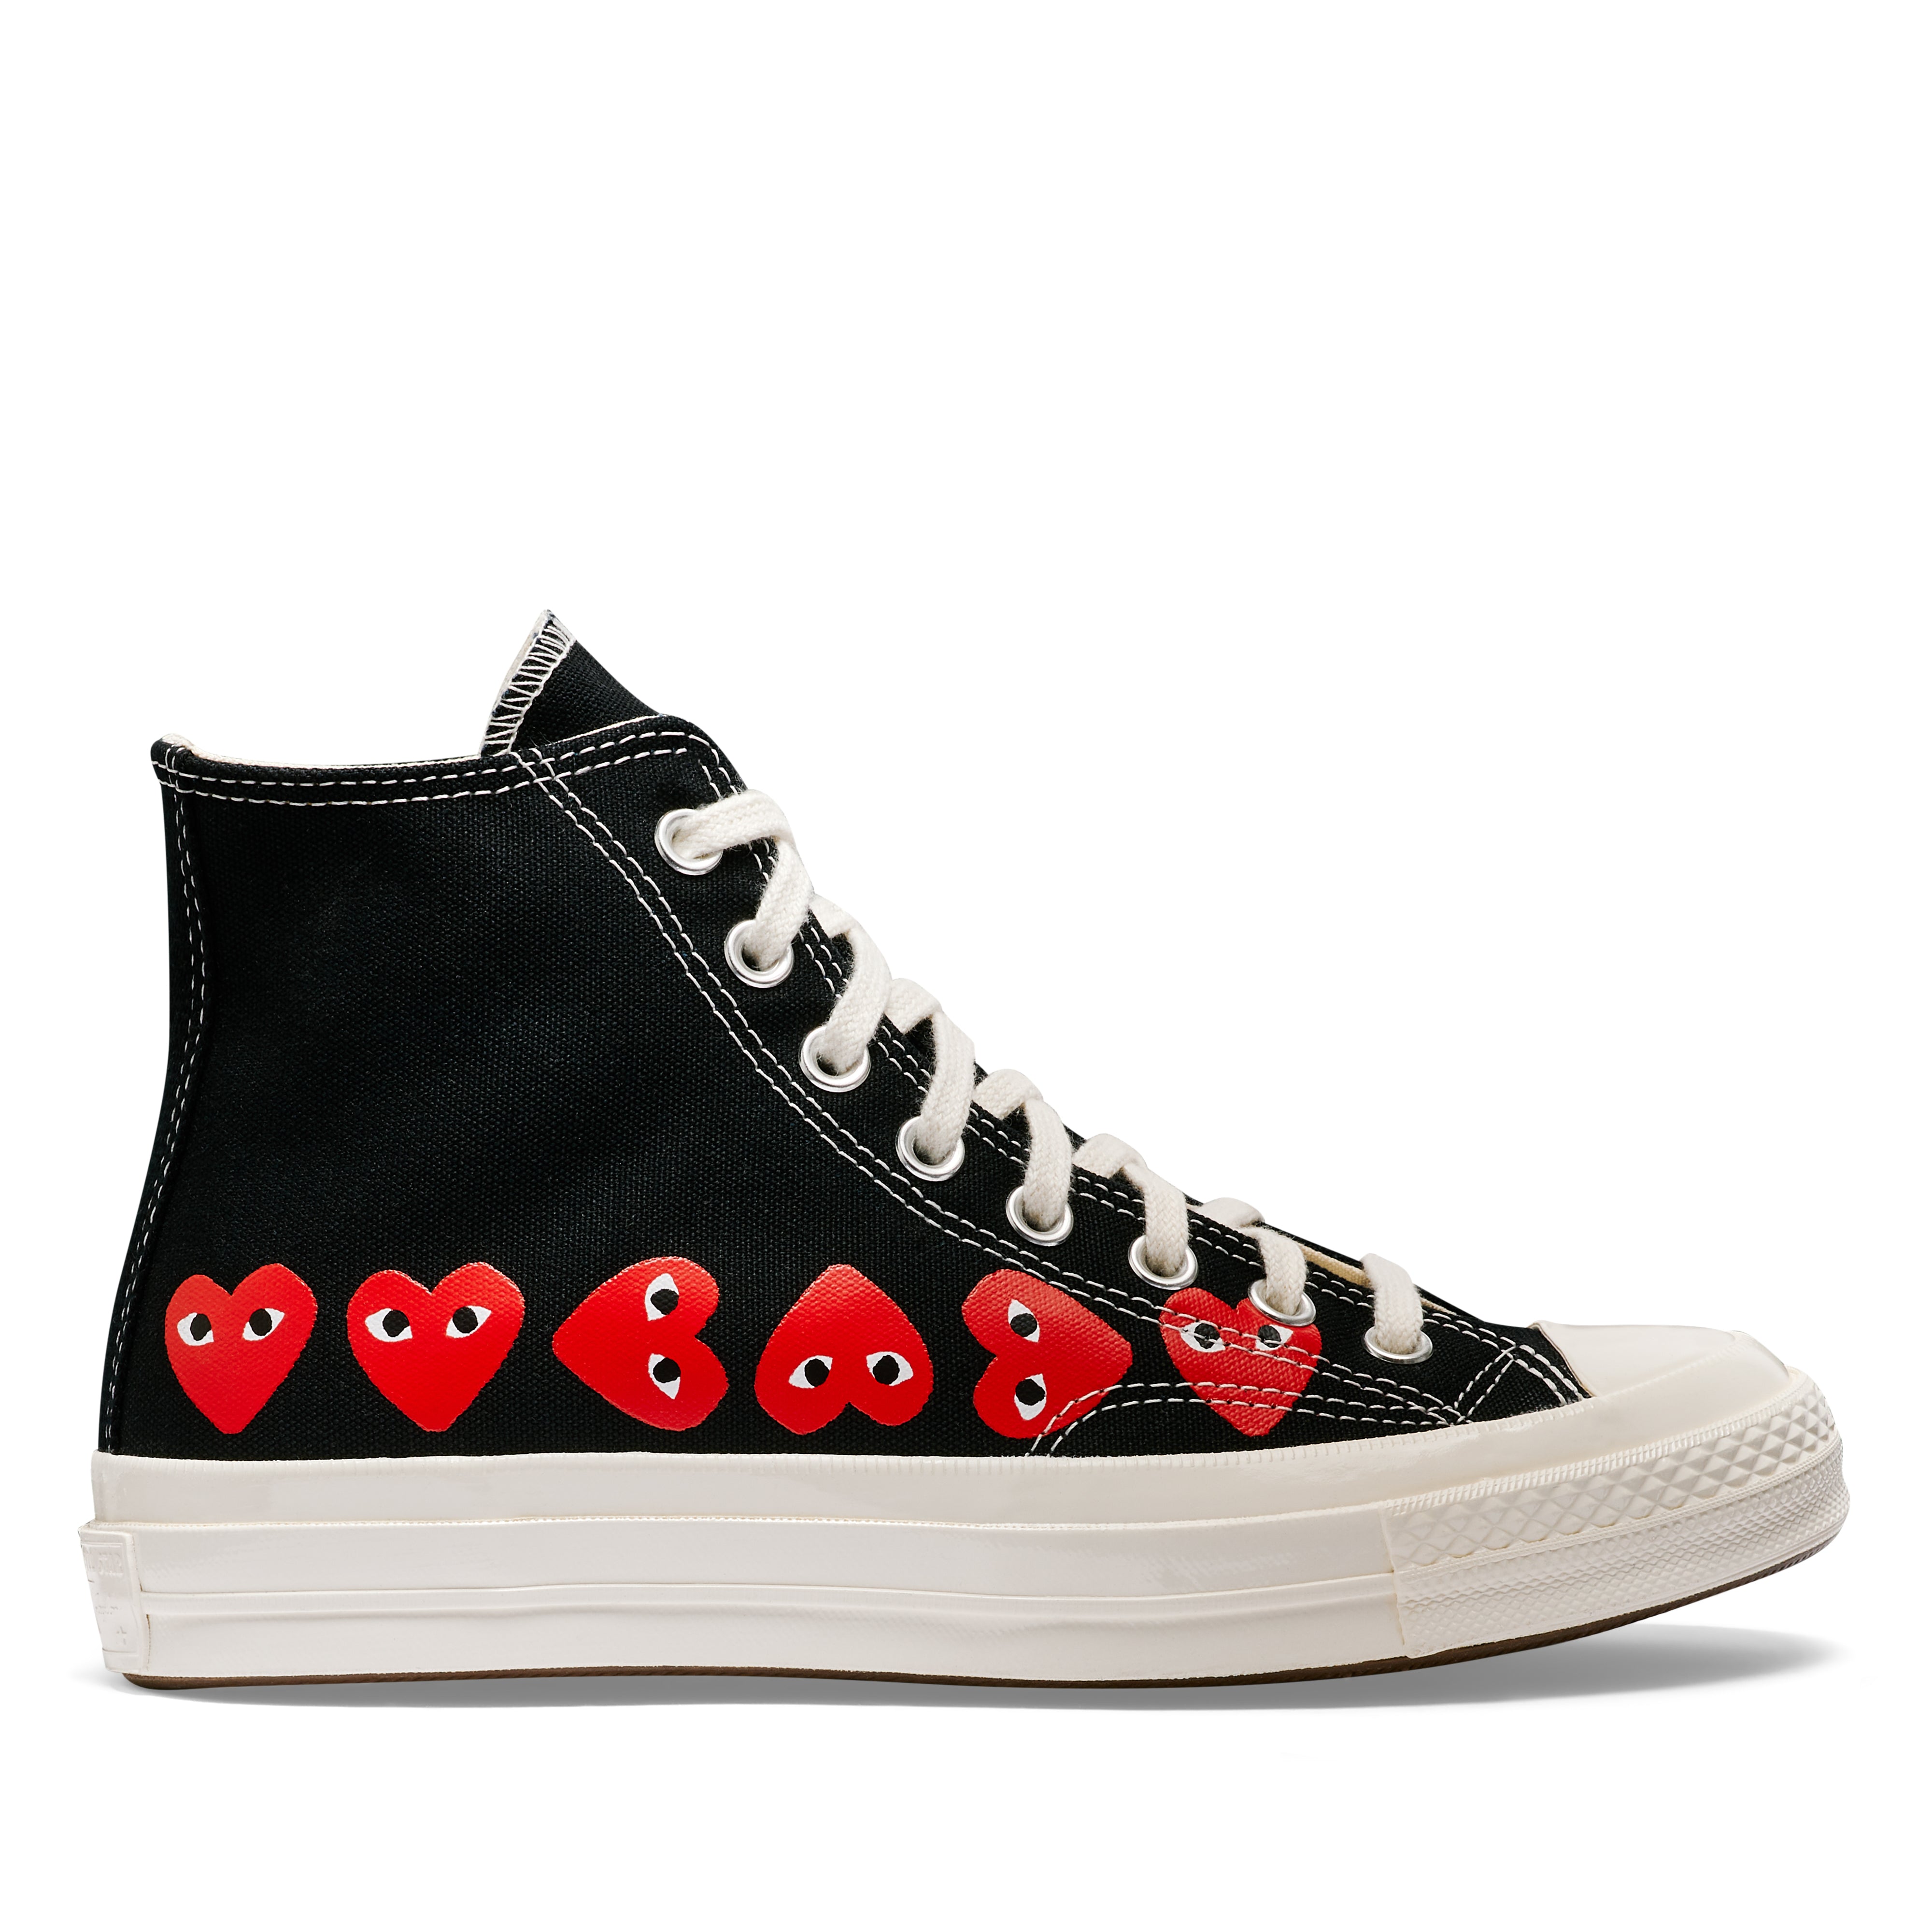 Play Converse - Red Heart Chuck Taylor All Star ’70 High Sneakers - (Black)